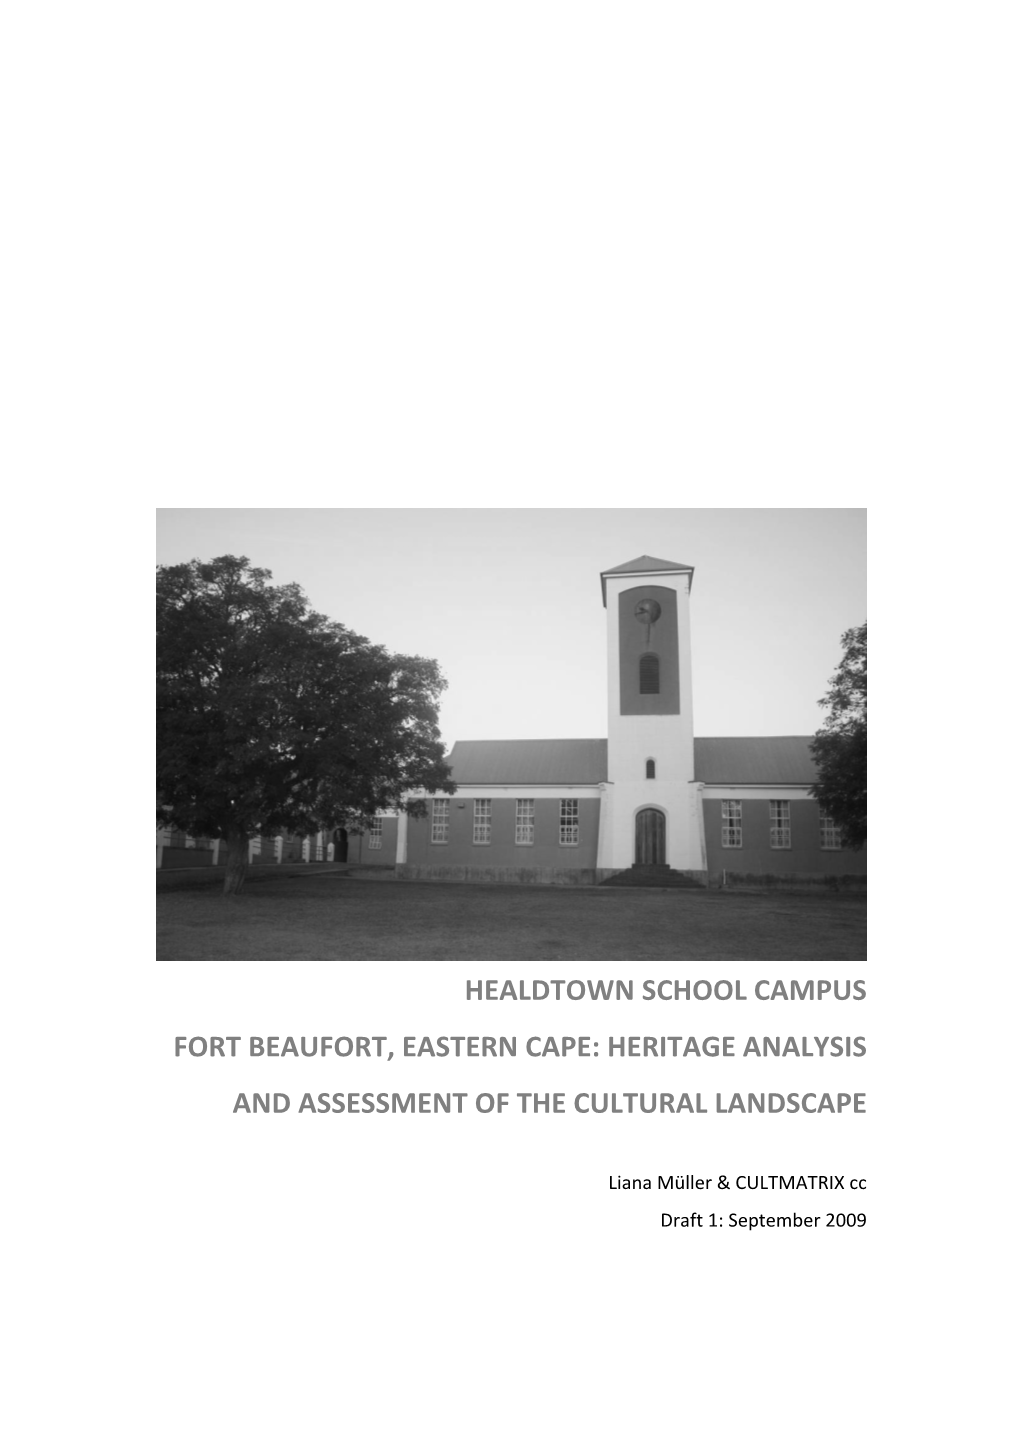 Healdtown School Campus Fort Beaufort, Eastern Cape: Heritage Analysis and Assessment of the Cultural Landscape